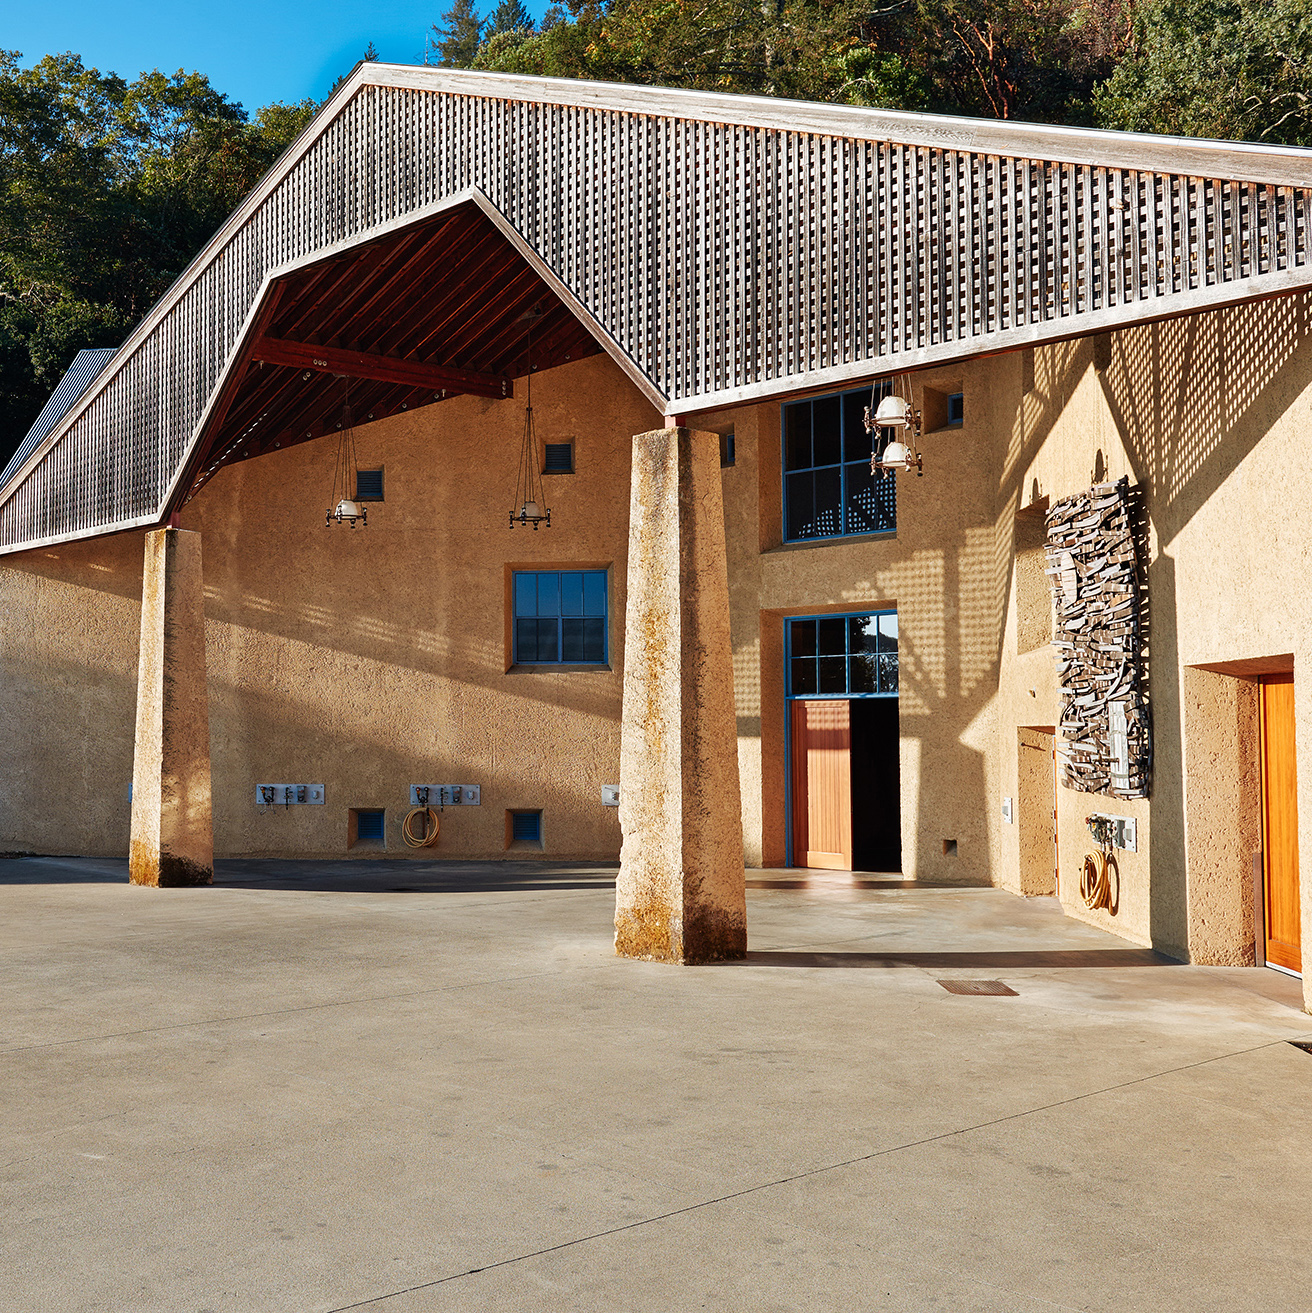 Exterior of the Long Meadow Ranch Winery